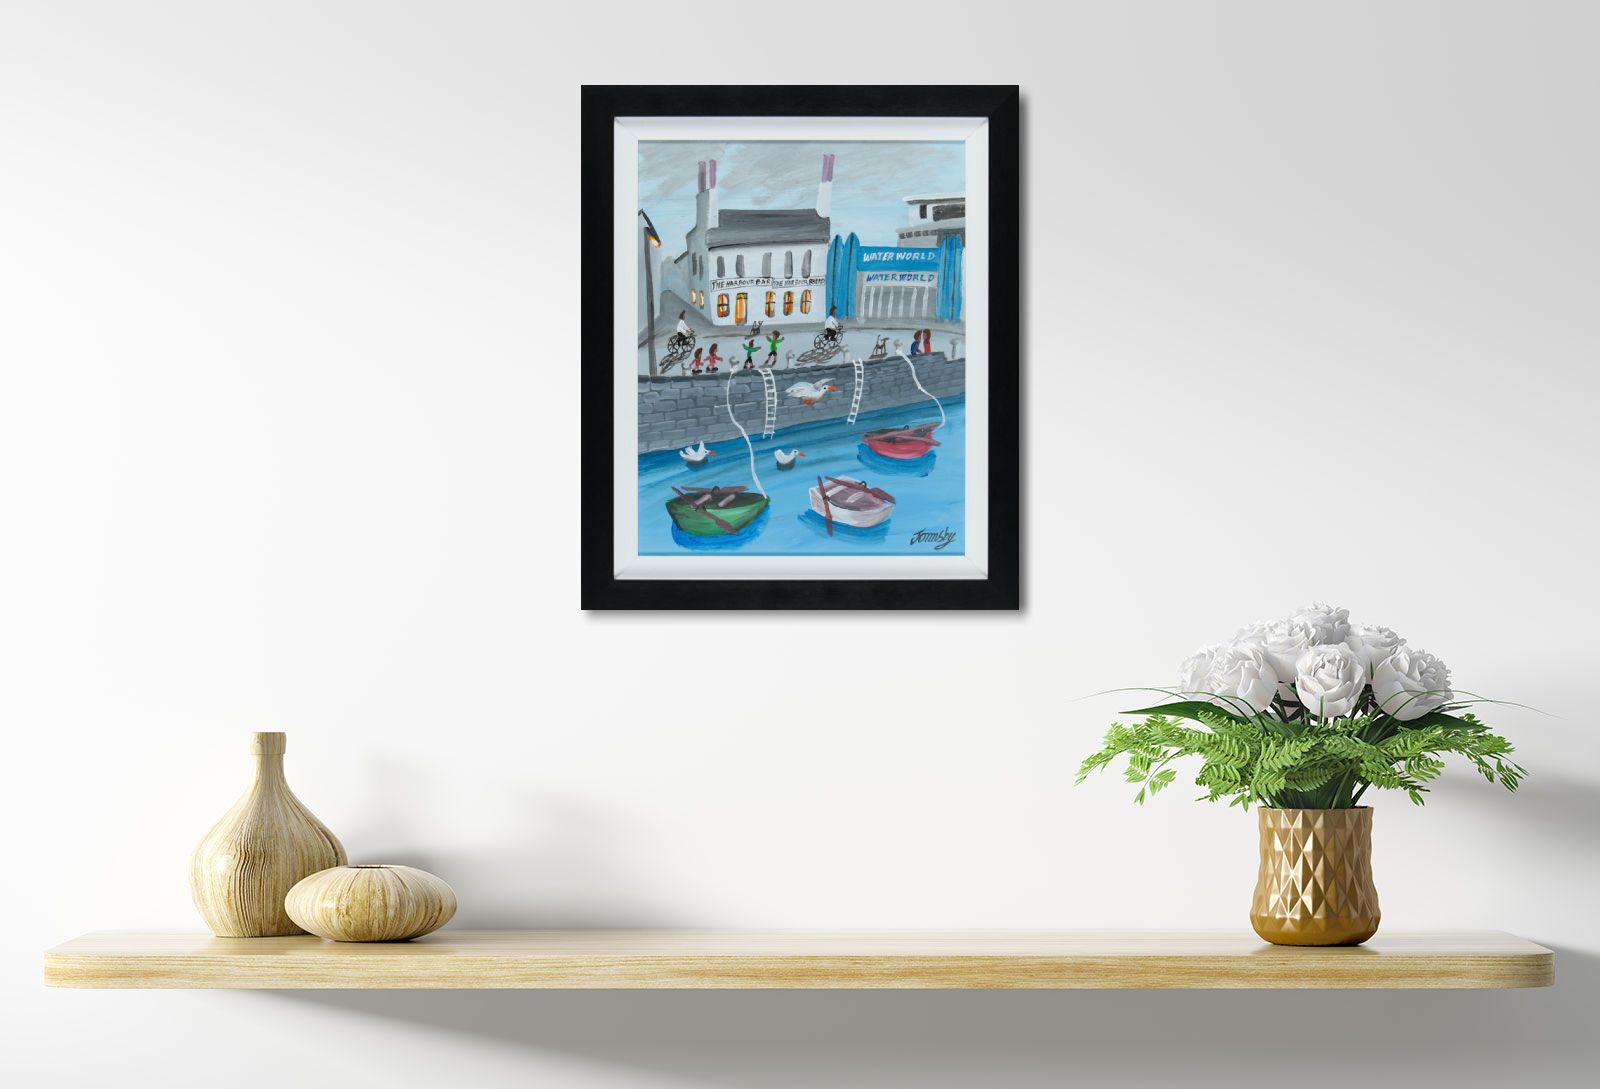 THE HARBOUR BAR by John Ormsby at Ross's Online Art Auctions